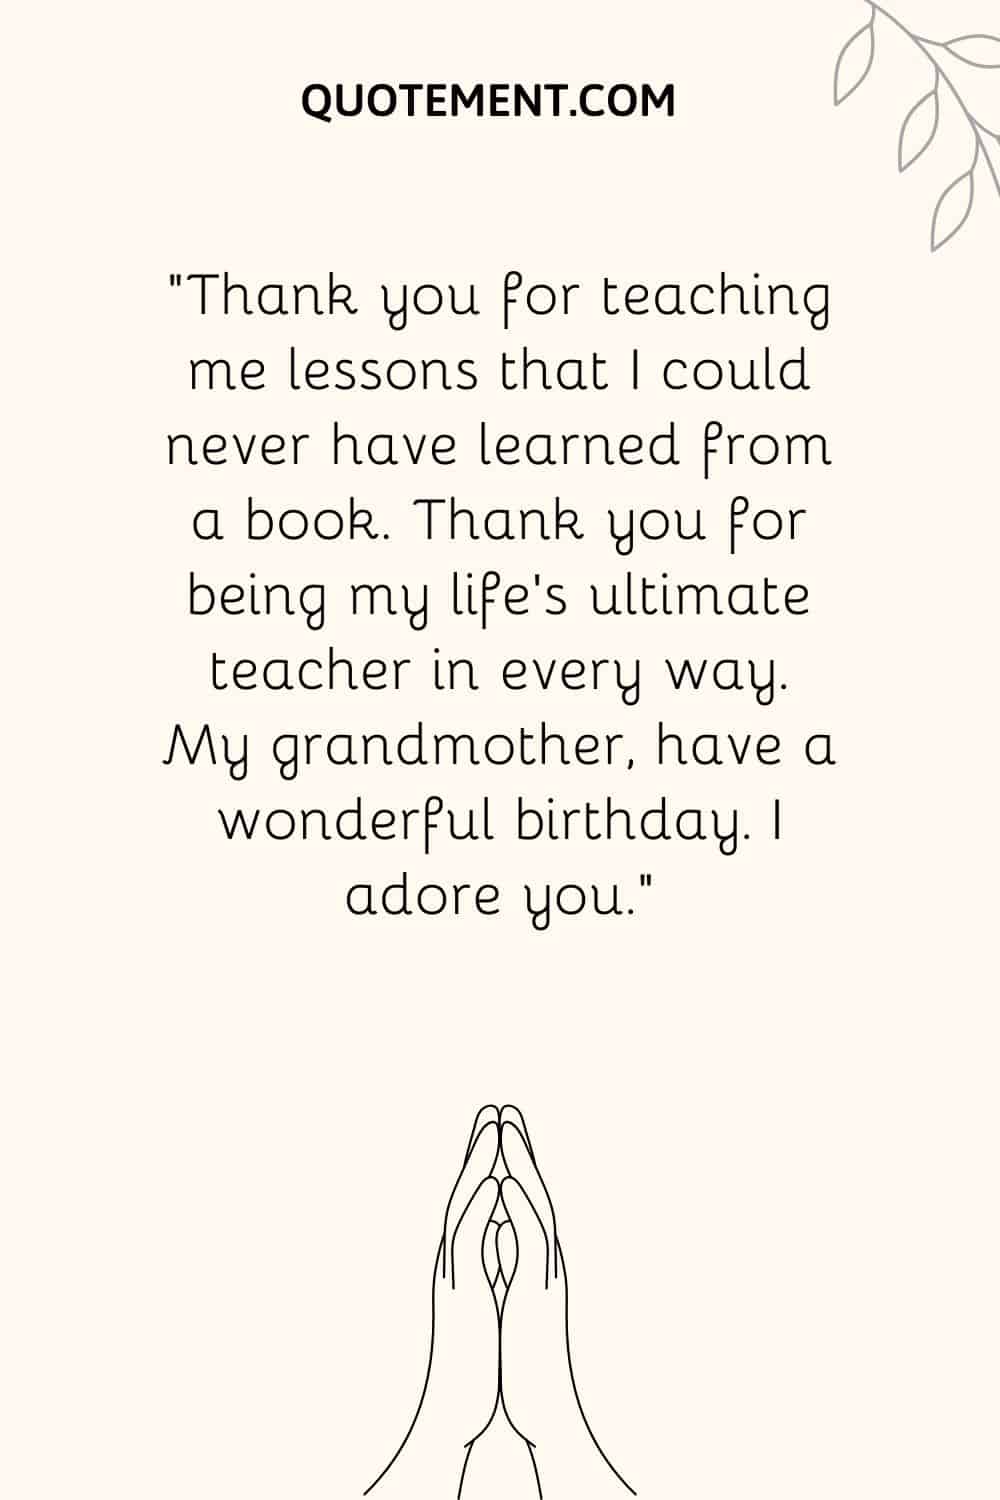 “Thank you for teaching me lessons that I could never have learned from a book. Thank you for being my life’s ultimate teacher in every way.